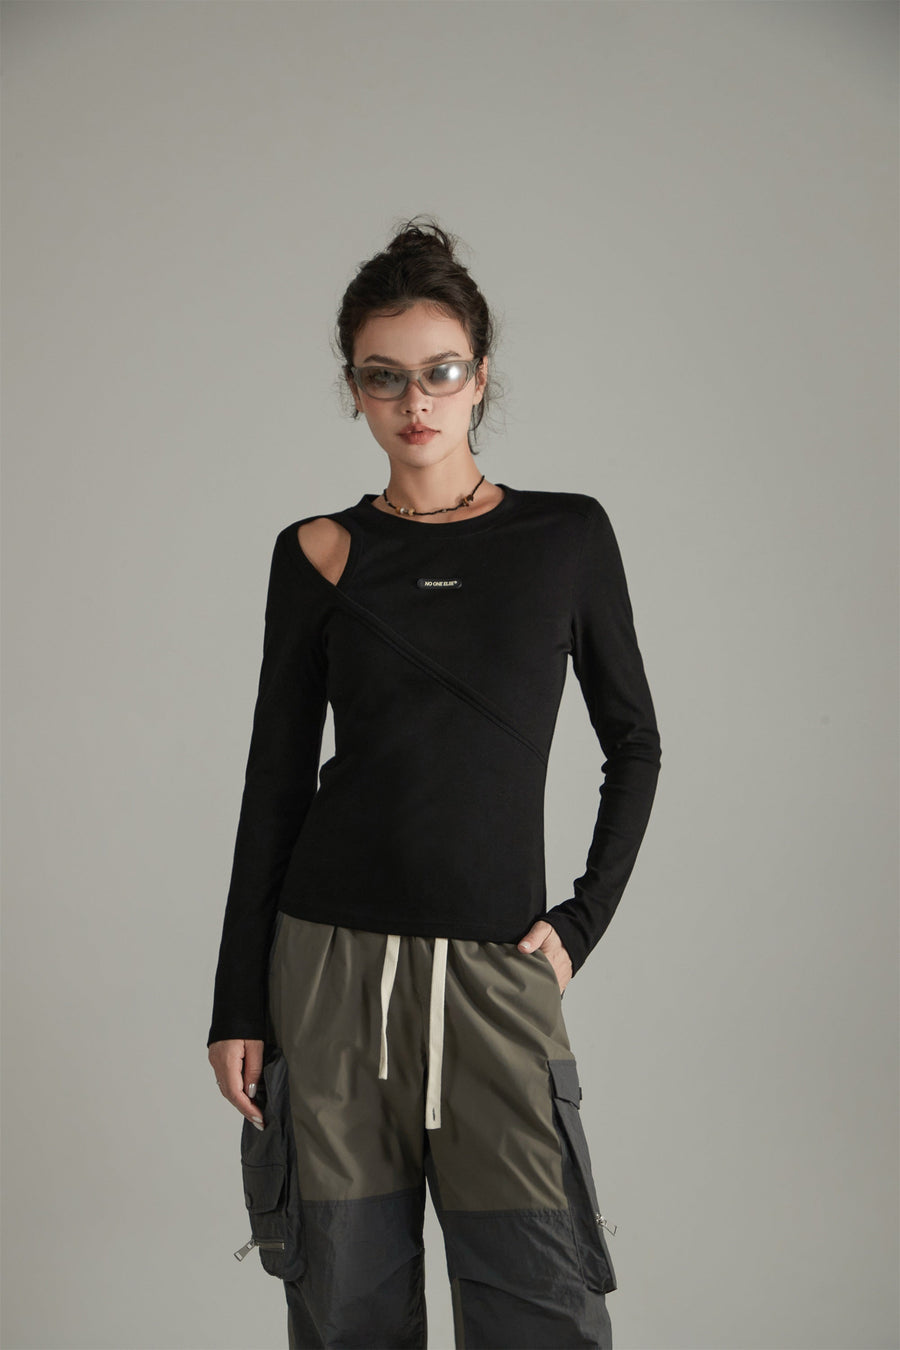 CHUU Layered Open Shoulder Simple T-Shirt